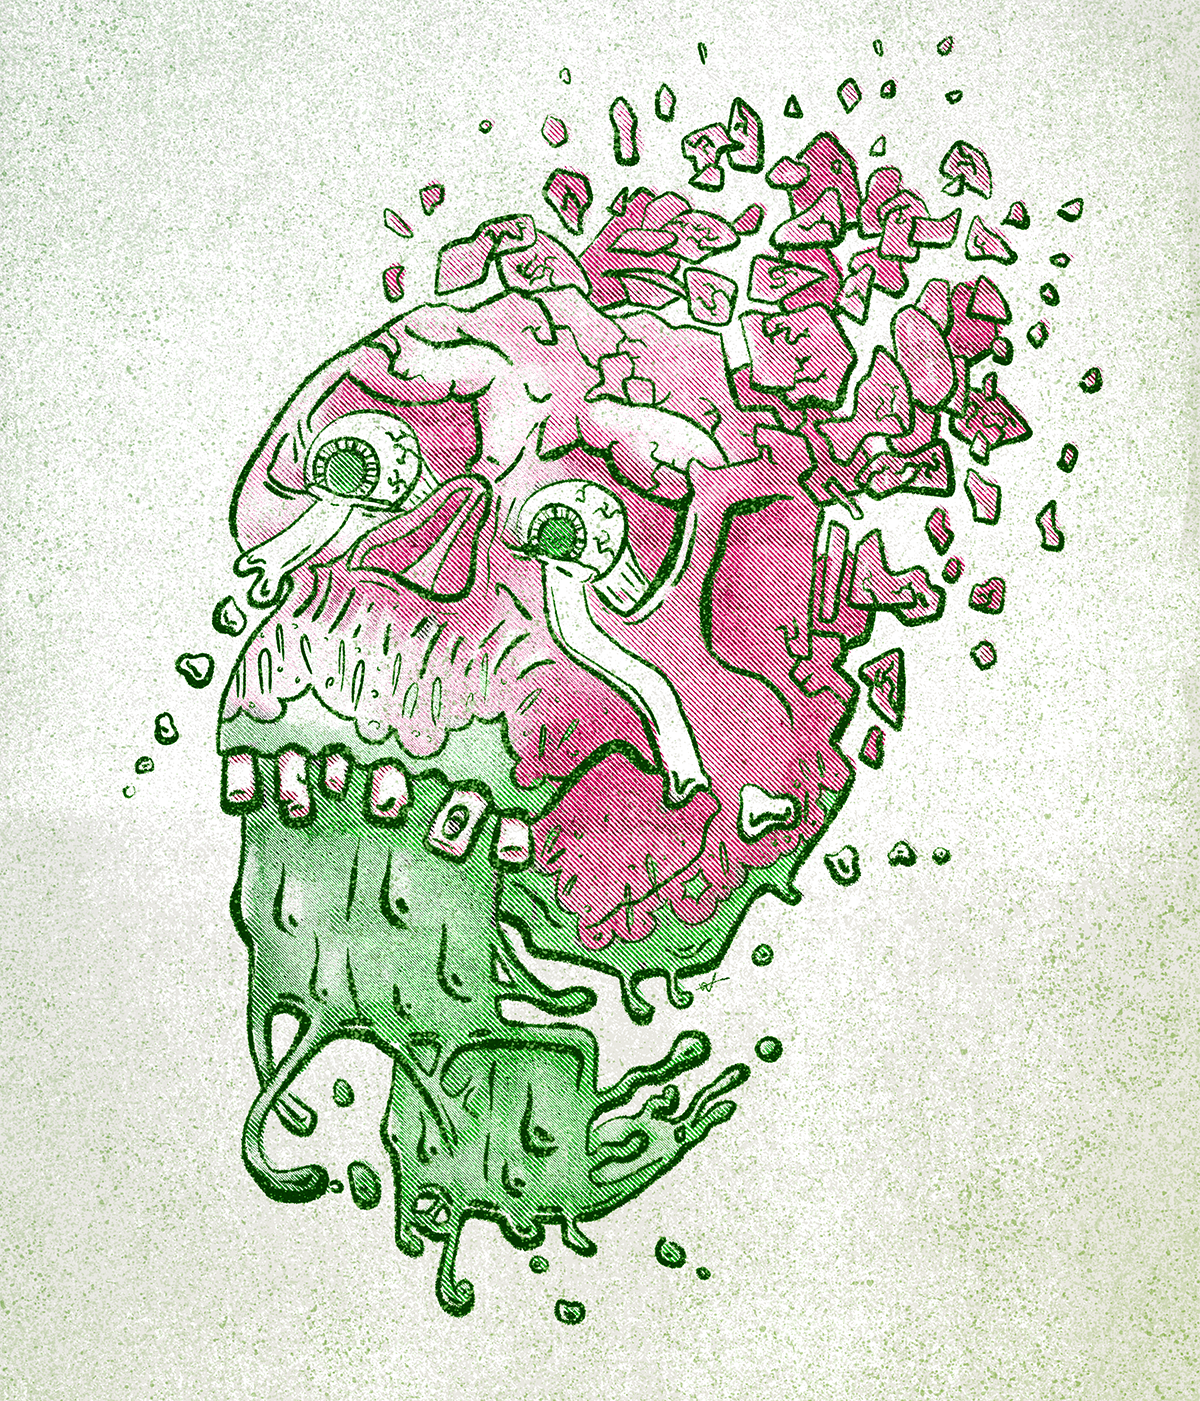 A digital illustration by Brian Wolfe of a skull with no lower jaw. The tongue of the skull drips with liquid and is green, and the top half of the skull is disintegrating.